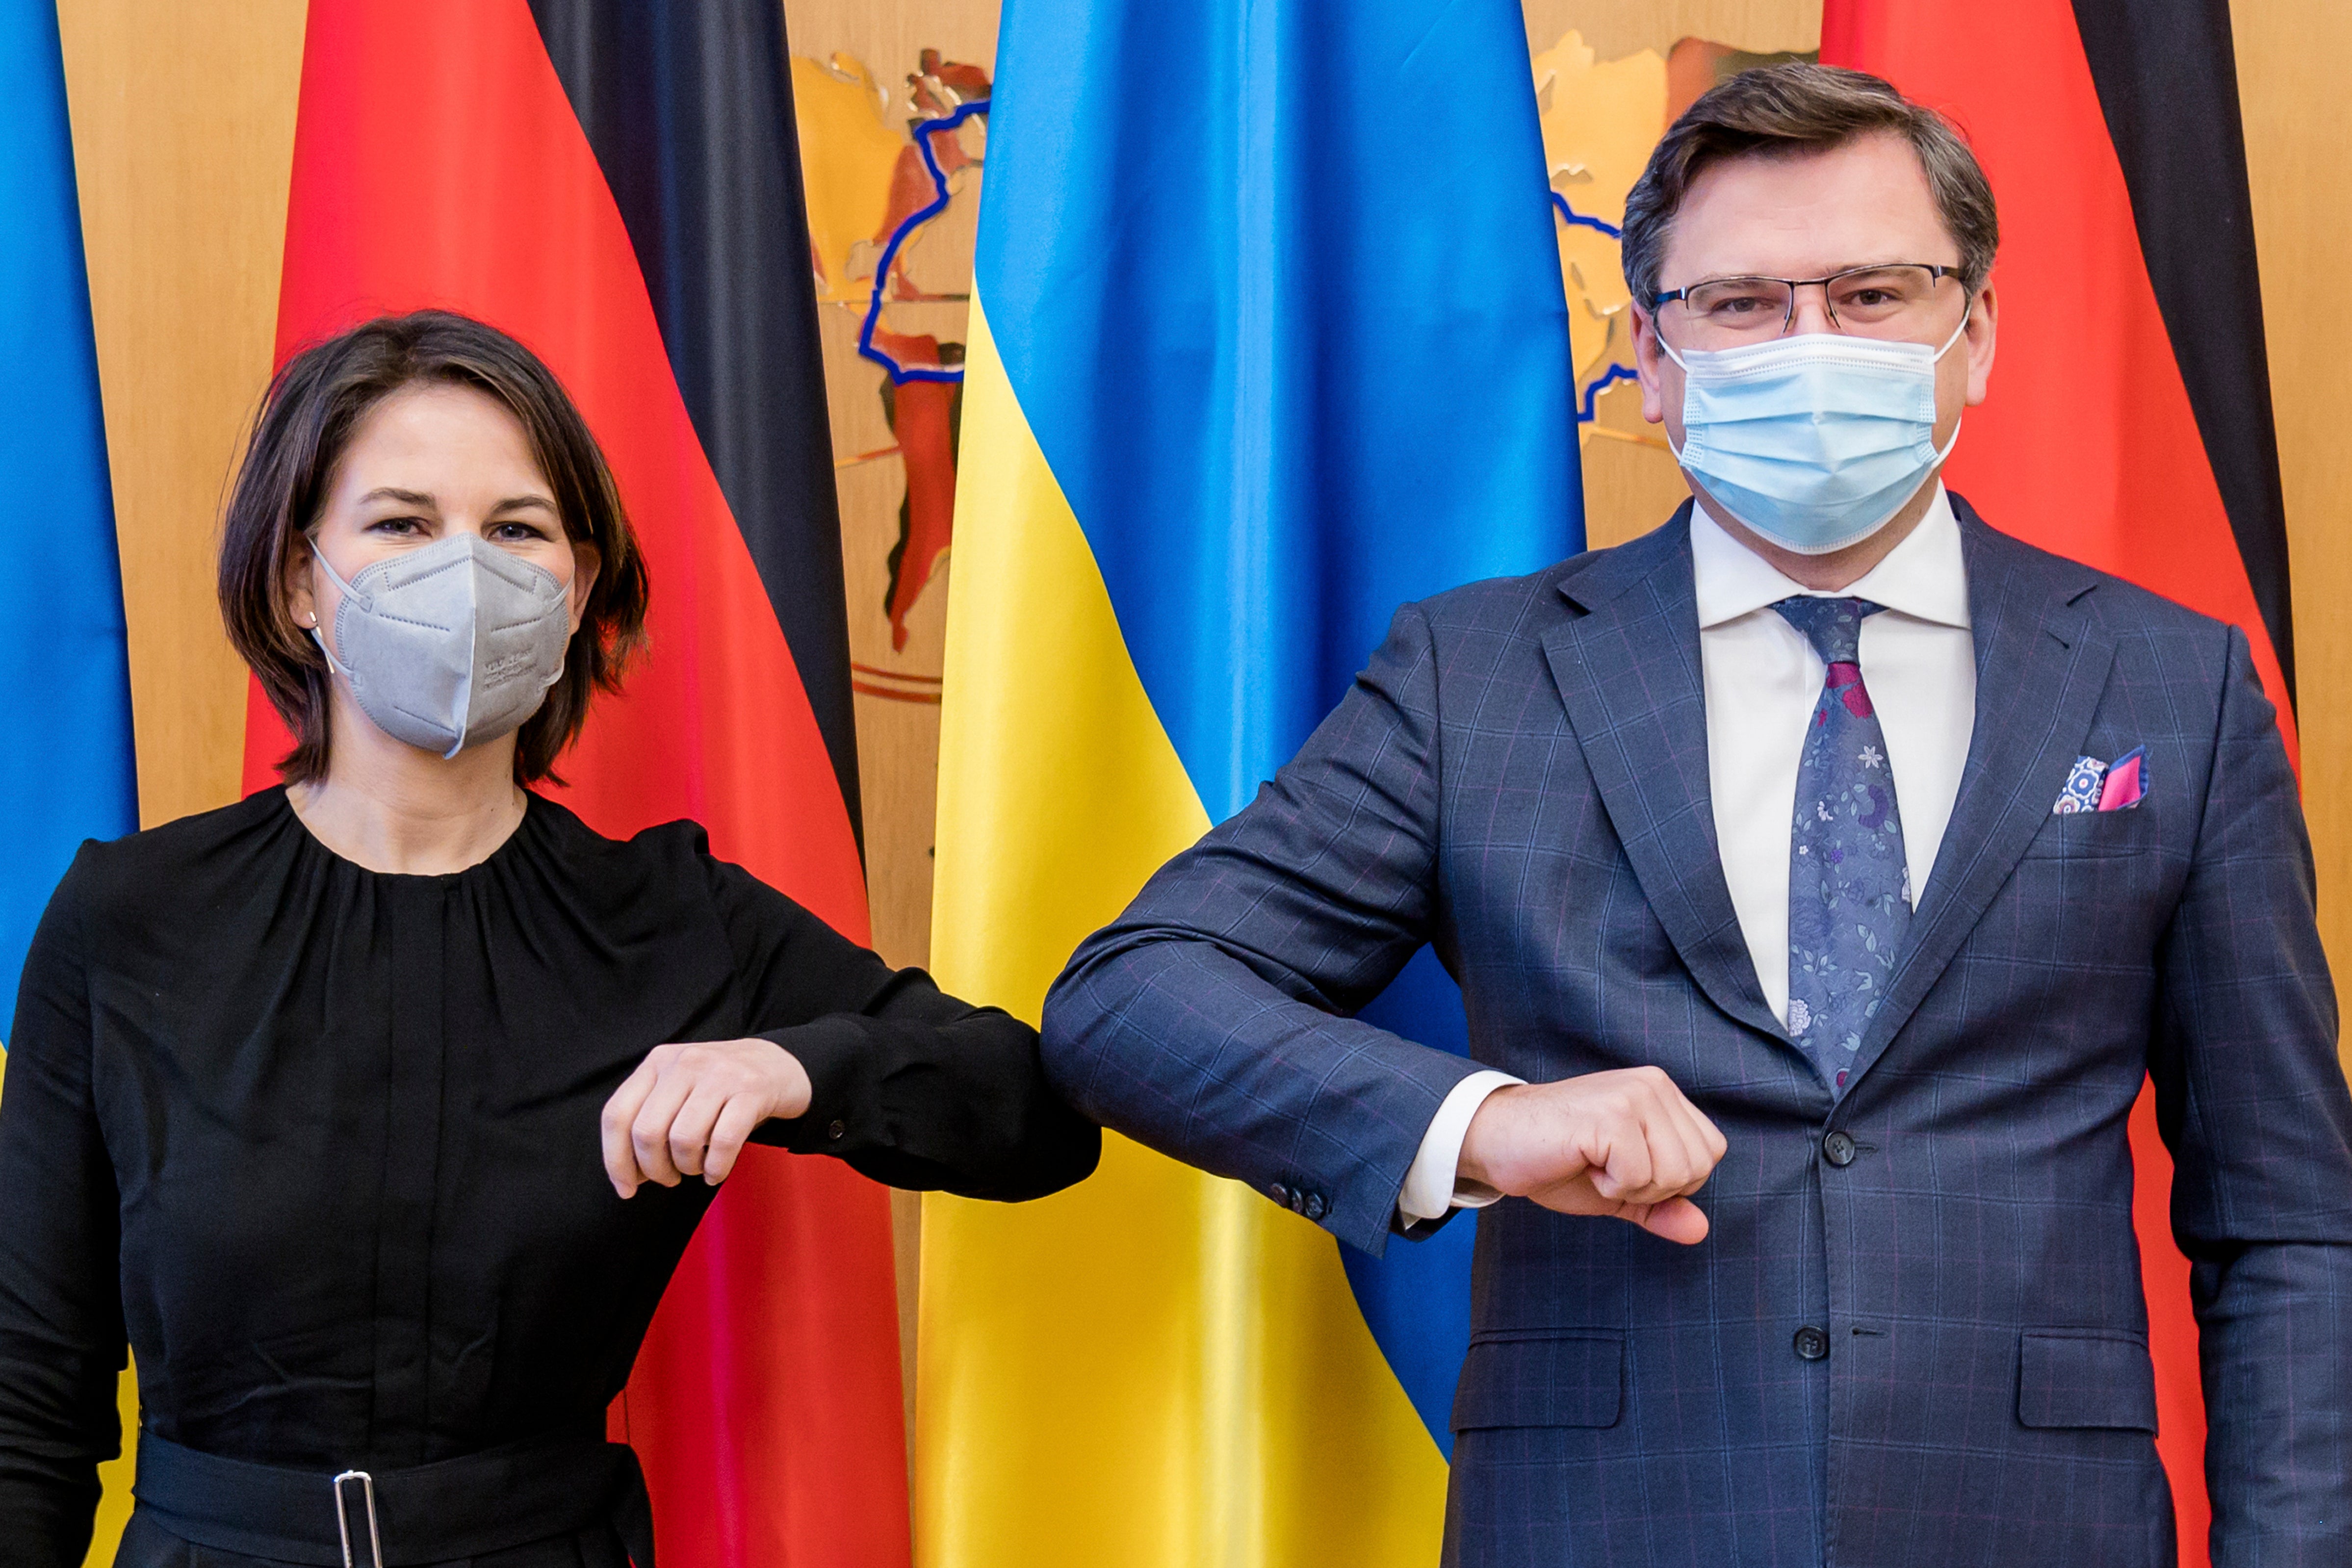 German Foreign Minister Annalena Baerbock (left) and her Ukrainian counterpart Dmytro Kuleba greeting each other in Kyiv, Ukraine